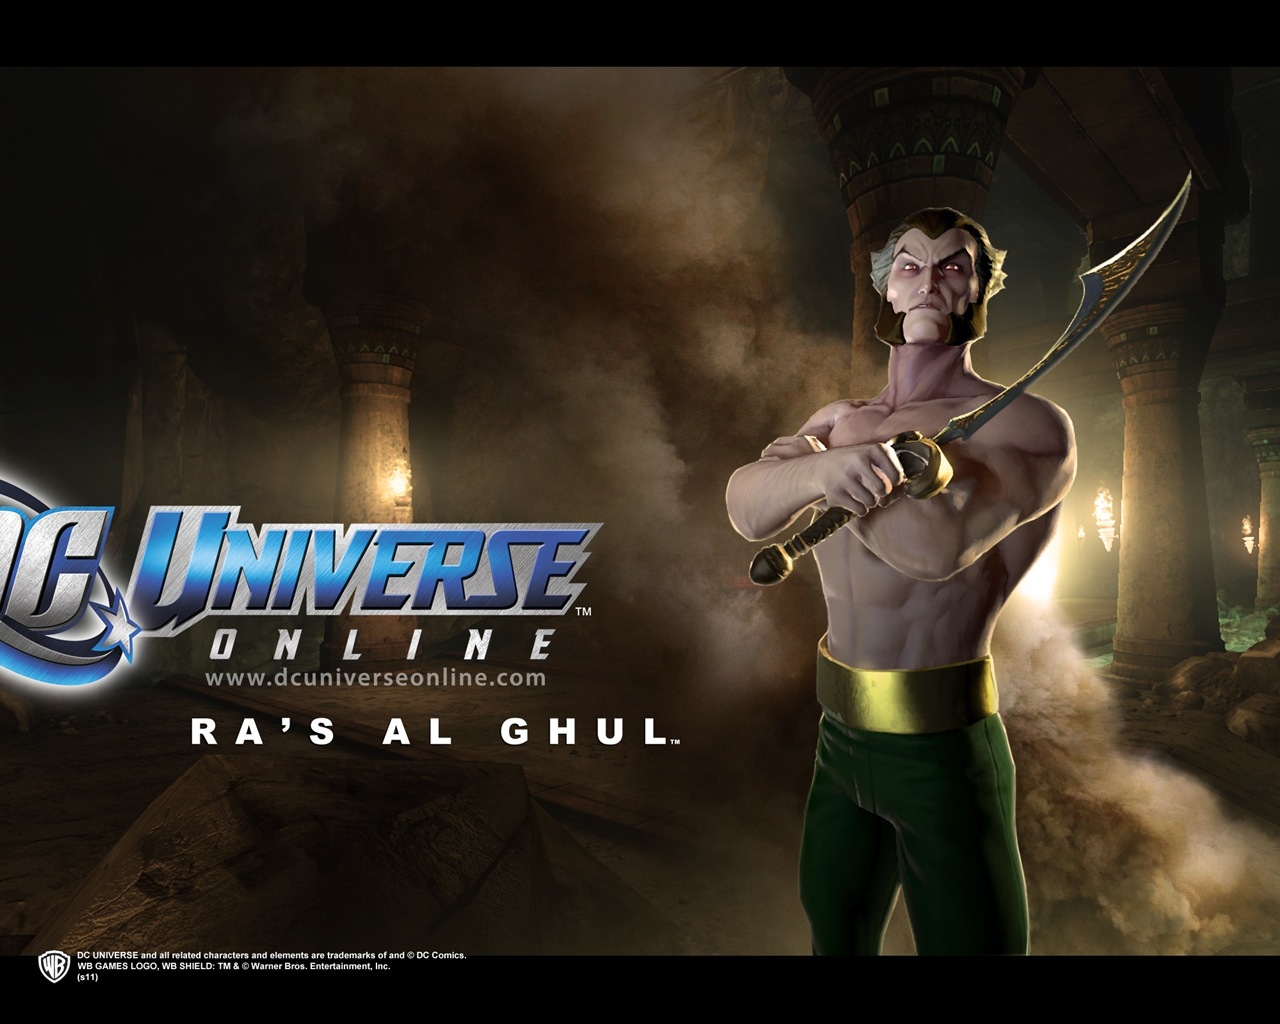 DC Universe Online HD game wallpapers #8 - 1280x1024